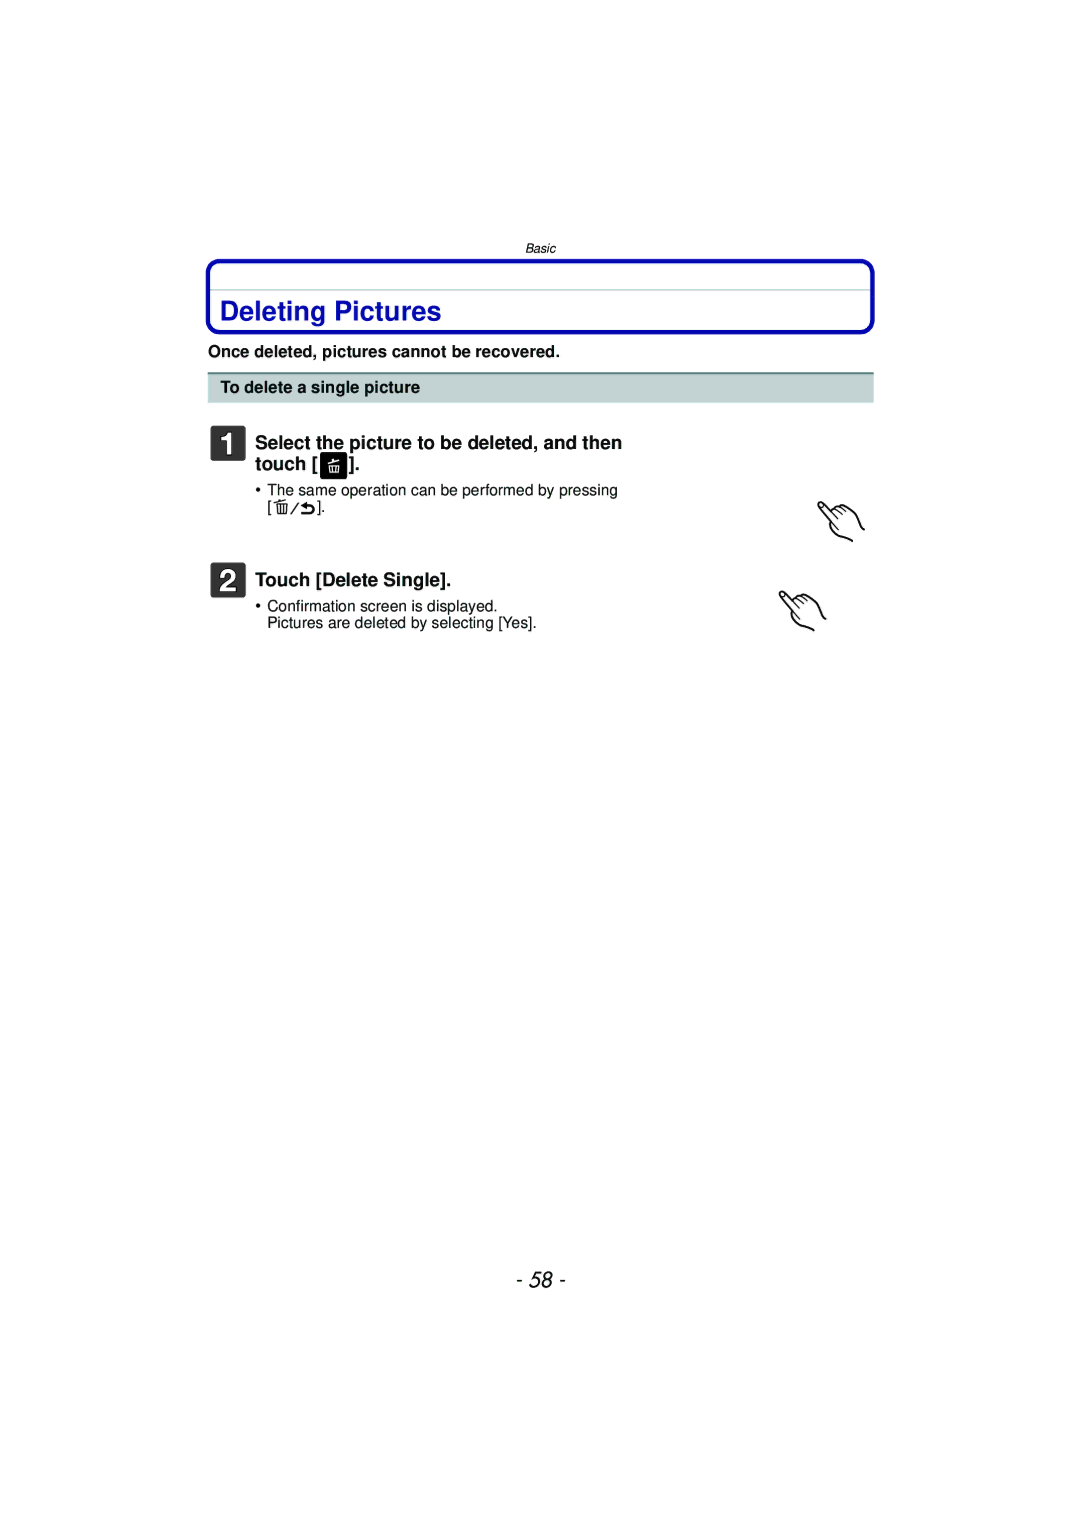 Panasonic DMC-GF5 owner manual Deleting Pictures, Select the picture to be deleted, and then touch, Touch Delete Single 